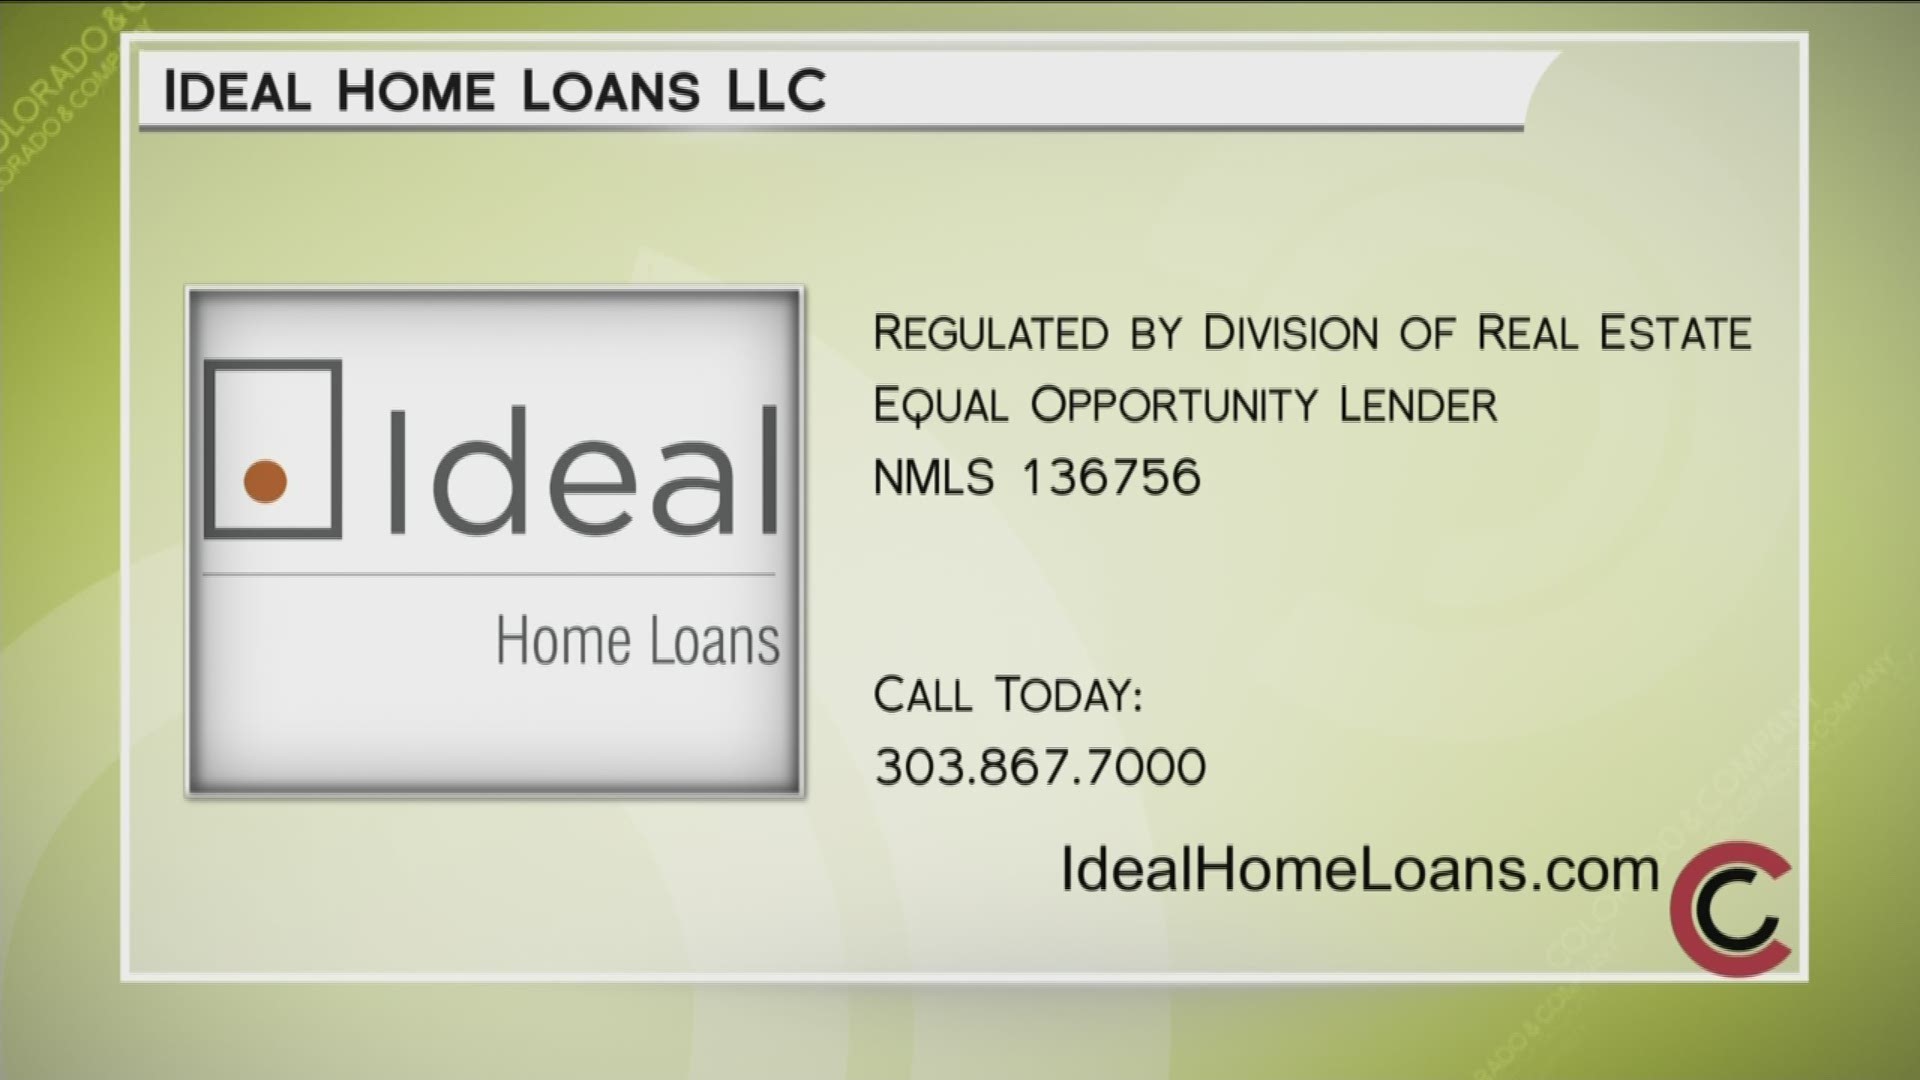 First they listen, then they lend. Find out your refinancing options with the team at Ideal Home Loans at www.IdealHomeLoans.com, or call 303.867.7000.